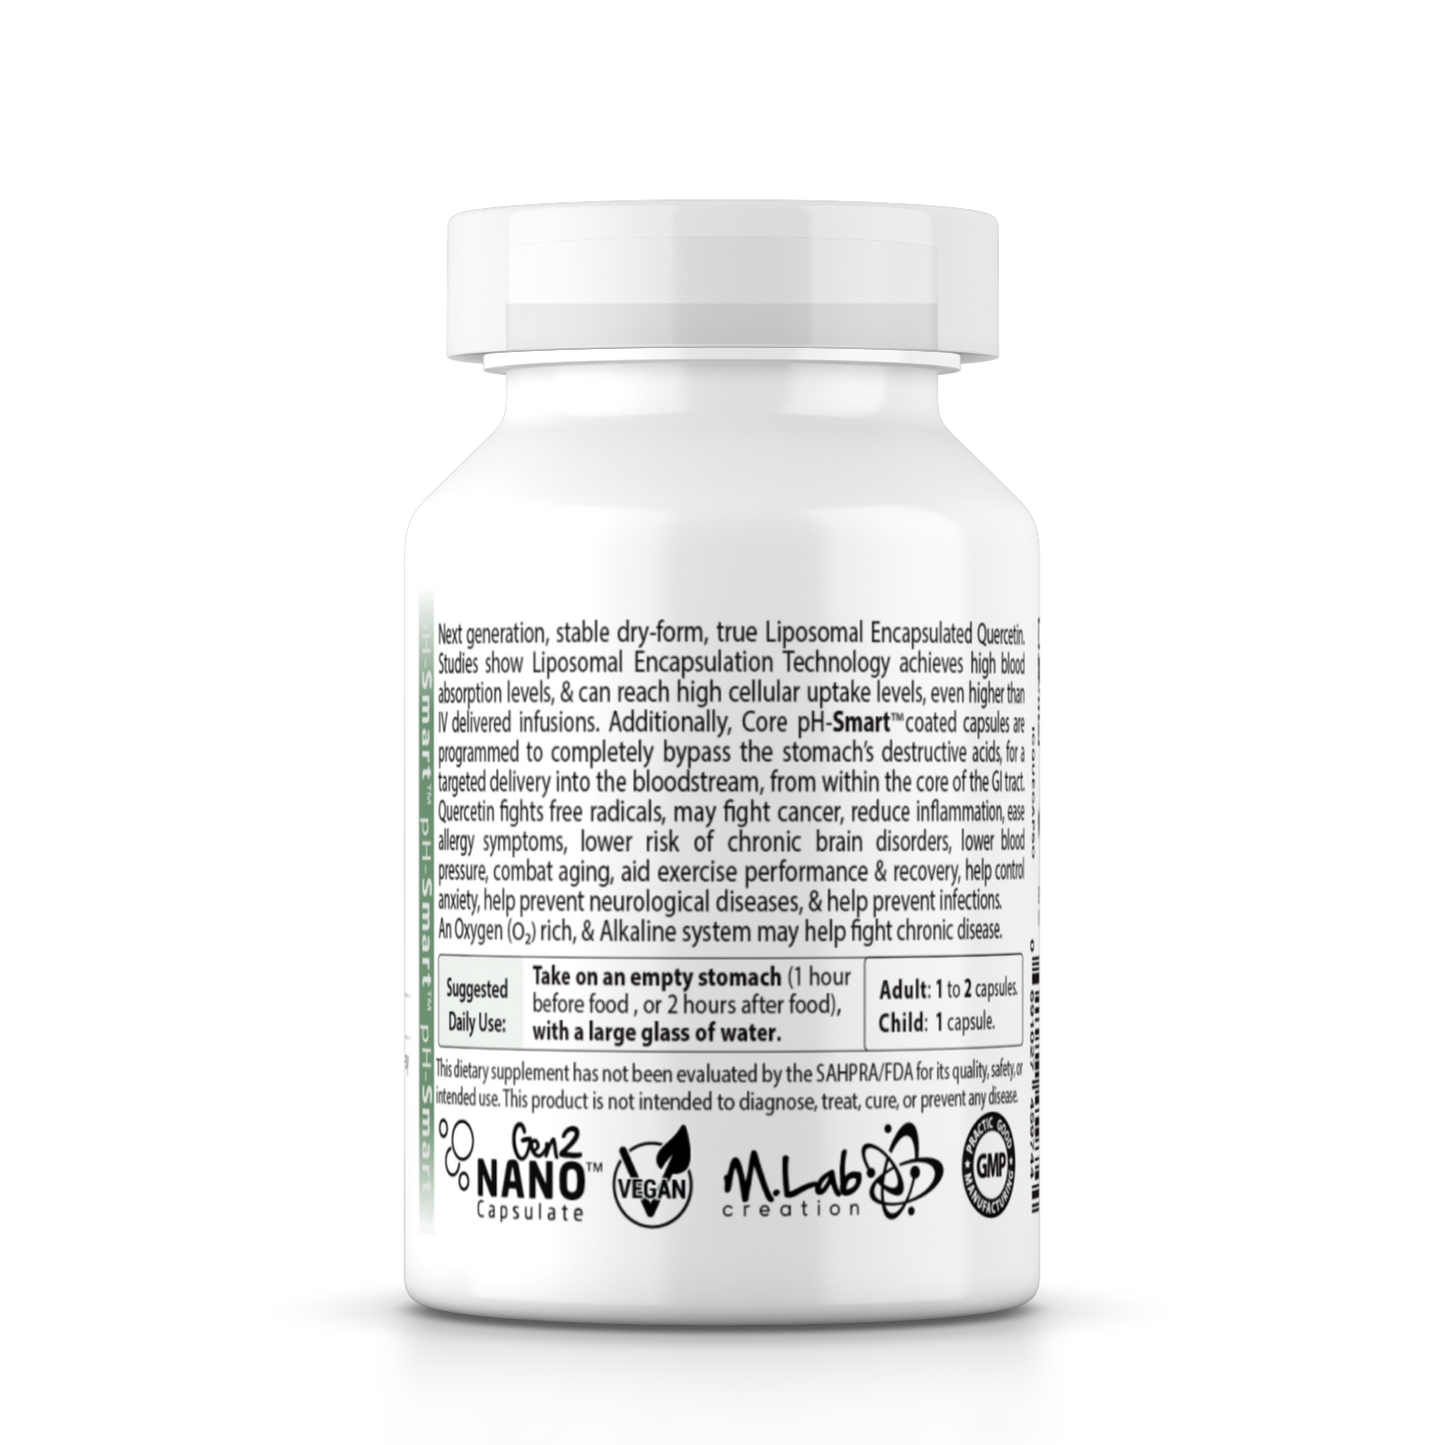 Quercetin (Liposomal) 400mg with Targeted Delivery